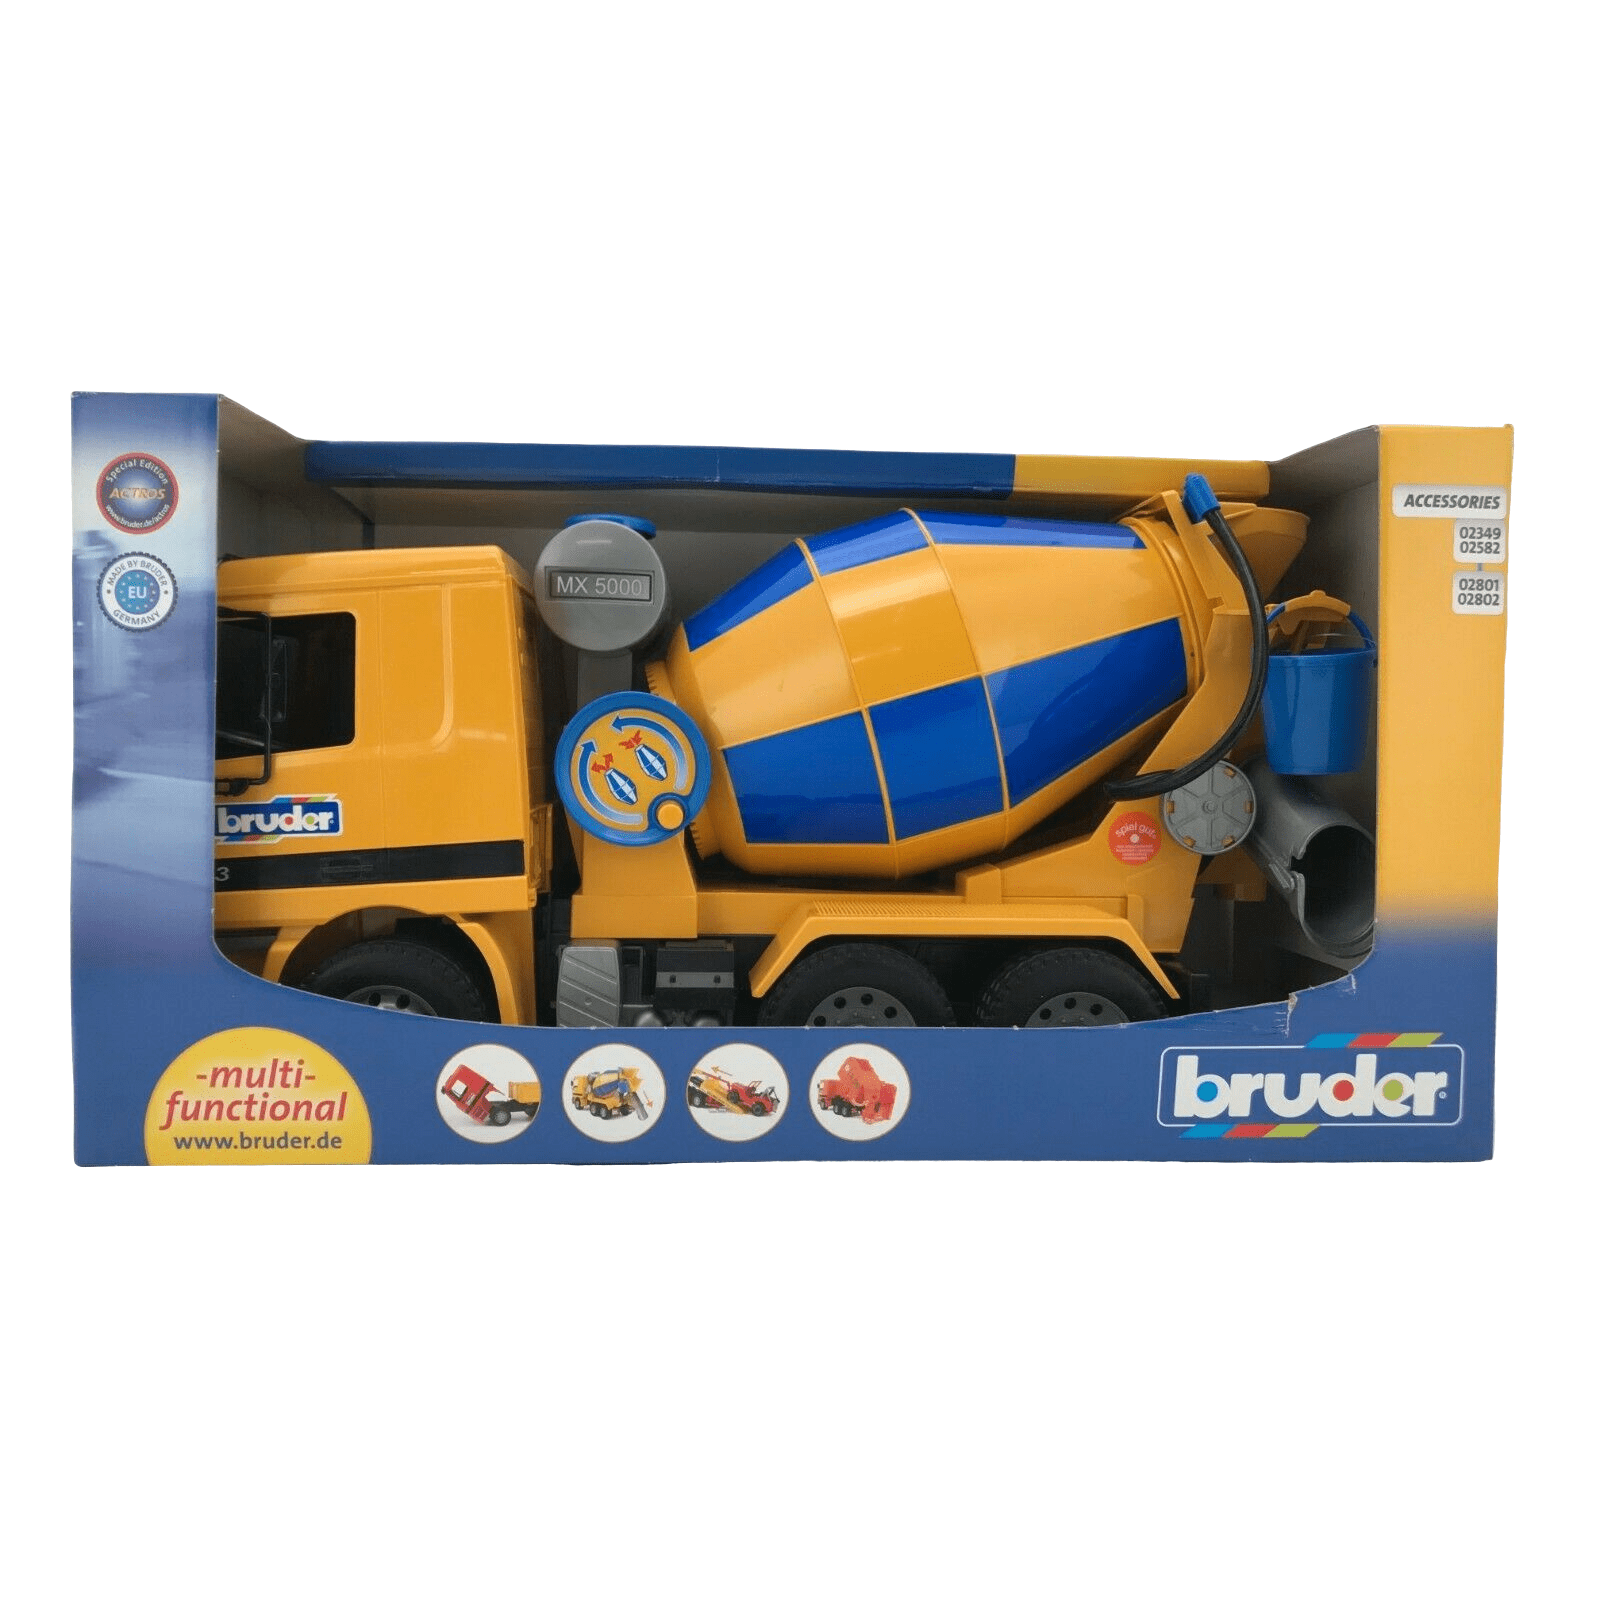 Warehouse Deal Bruder Toy Cement Mixing Toy With multiple functions and in Blue and Yellow